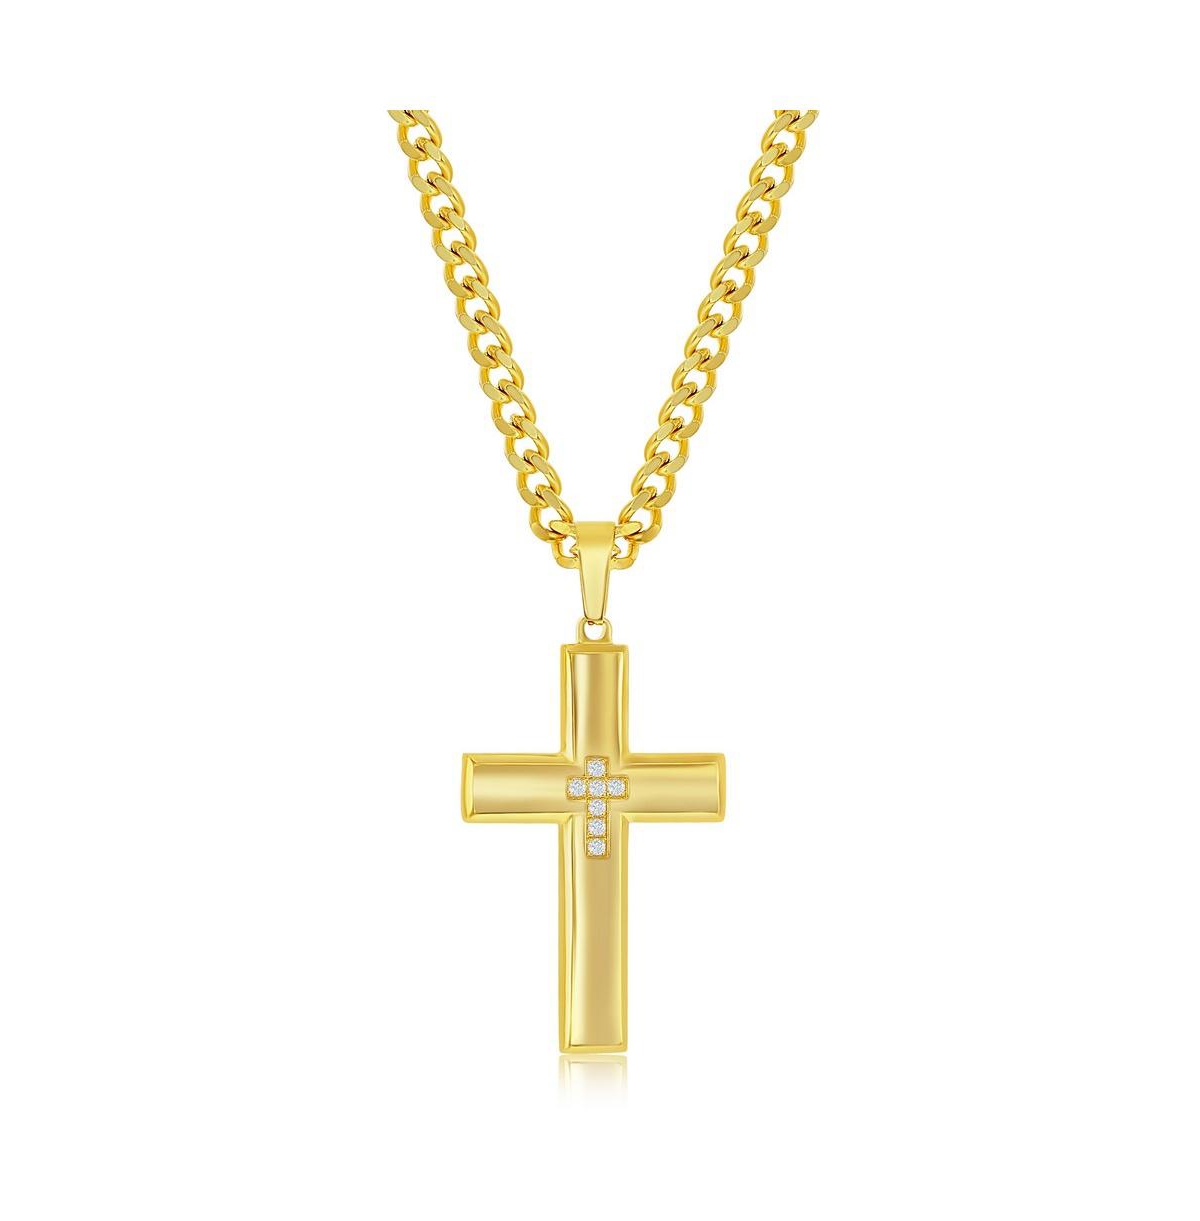 BLACKJACK MENS STAINLESS STEEL CZ CROSS NECKLACE - GOLD PLATED